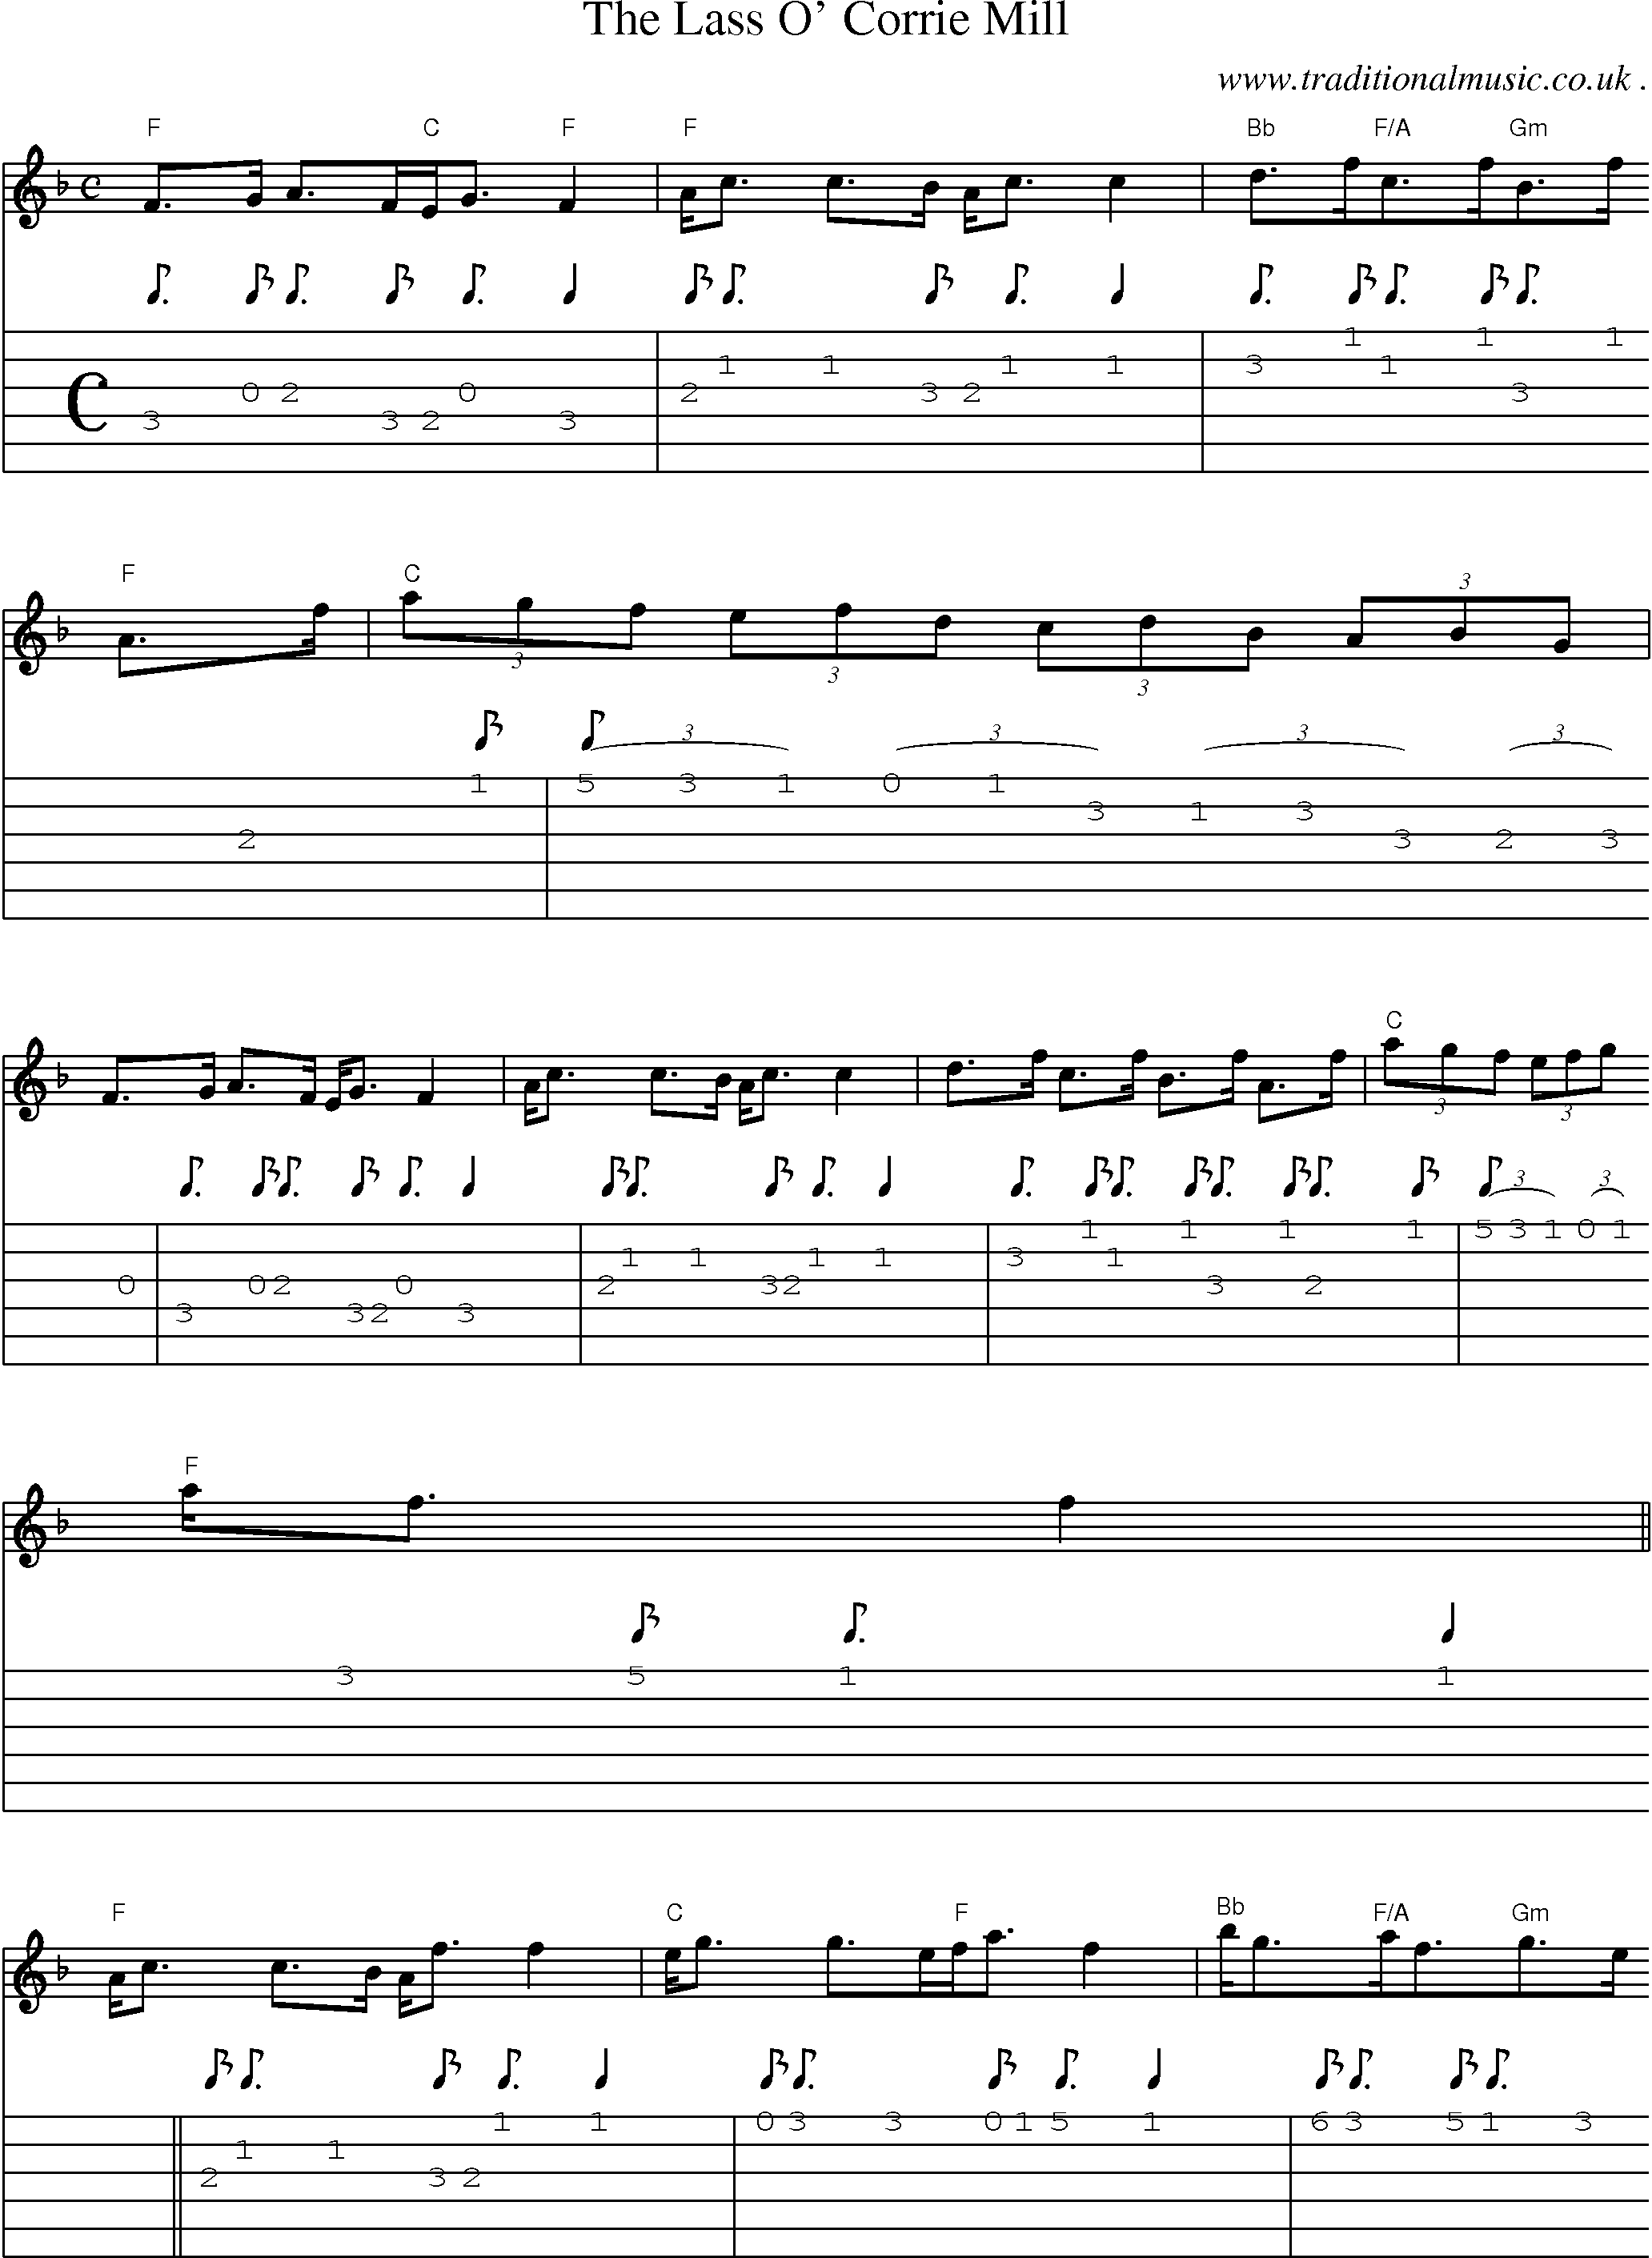 Sheet-Music and Guitar Tabs for The Lass O Corrie Mill